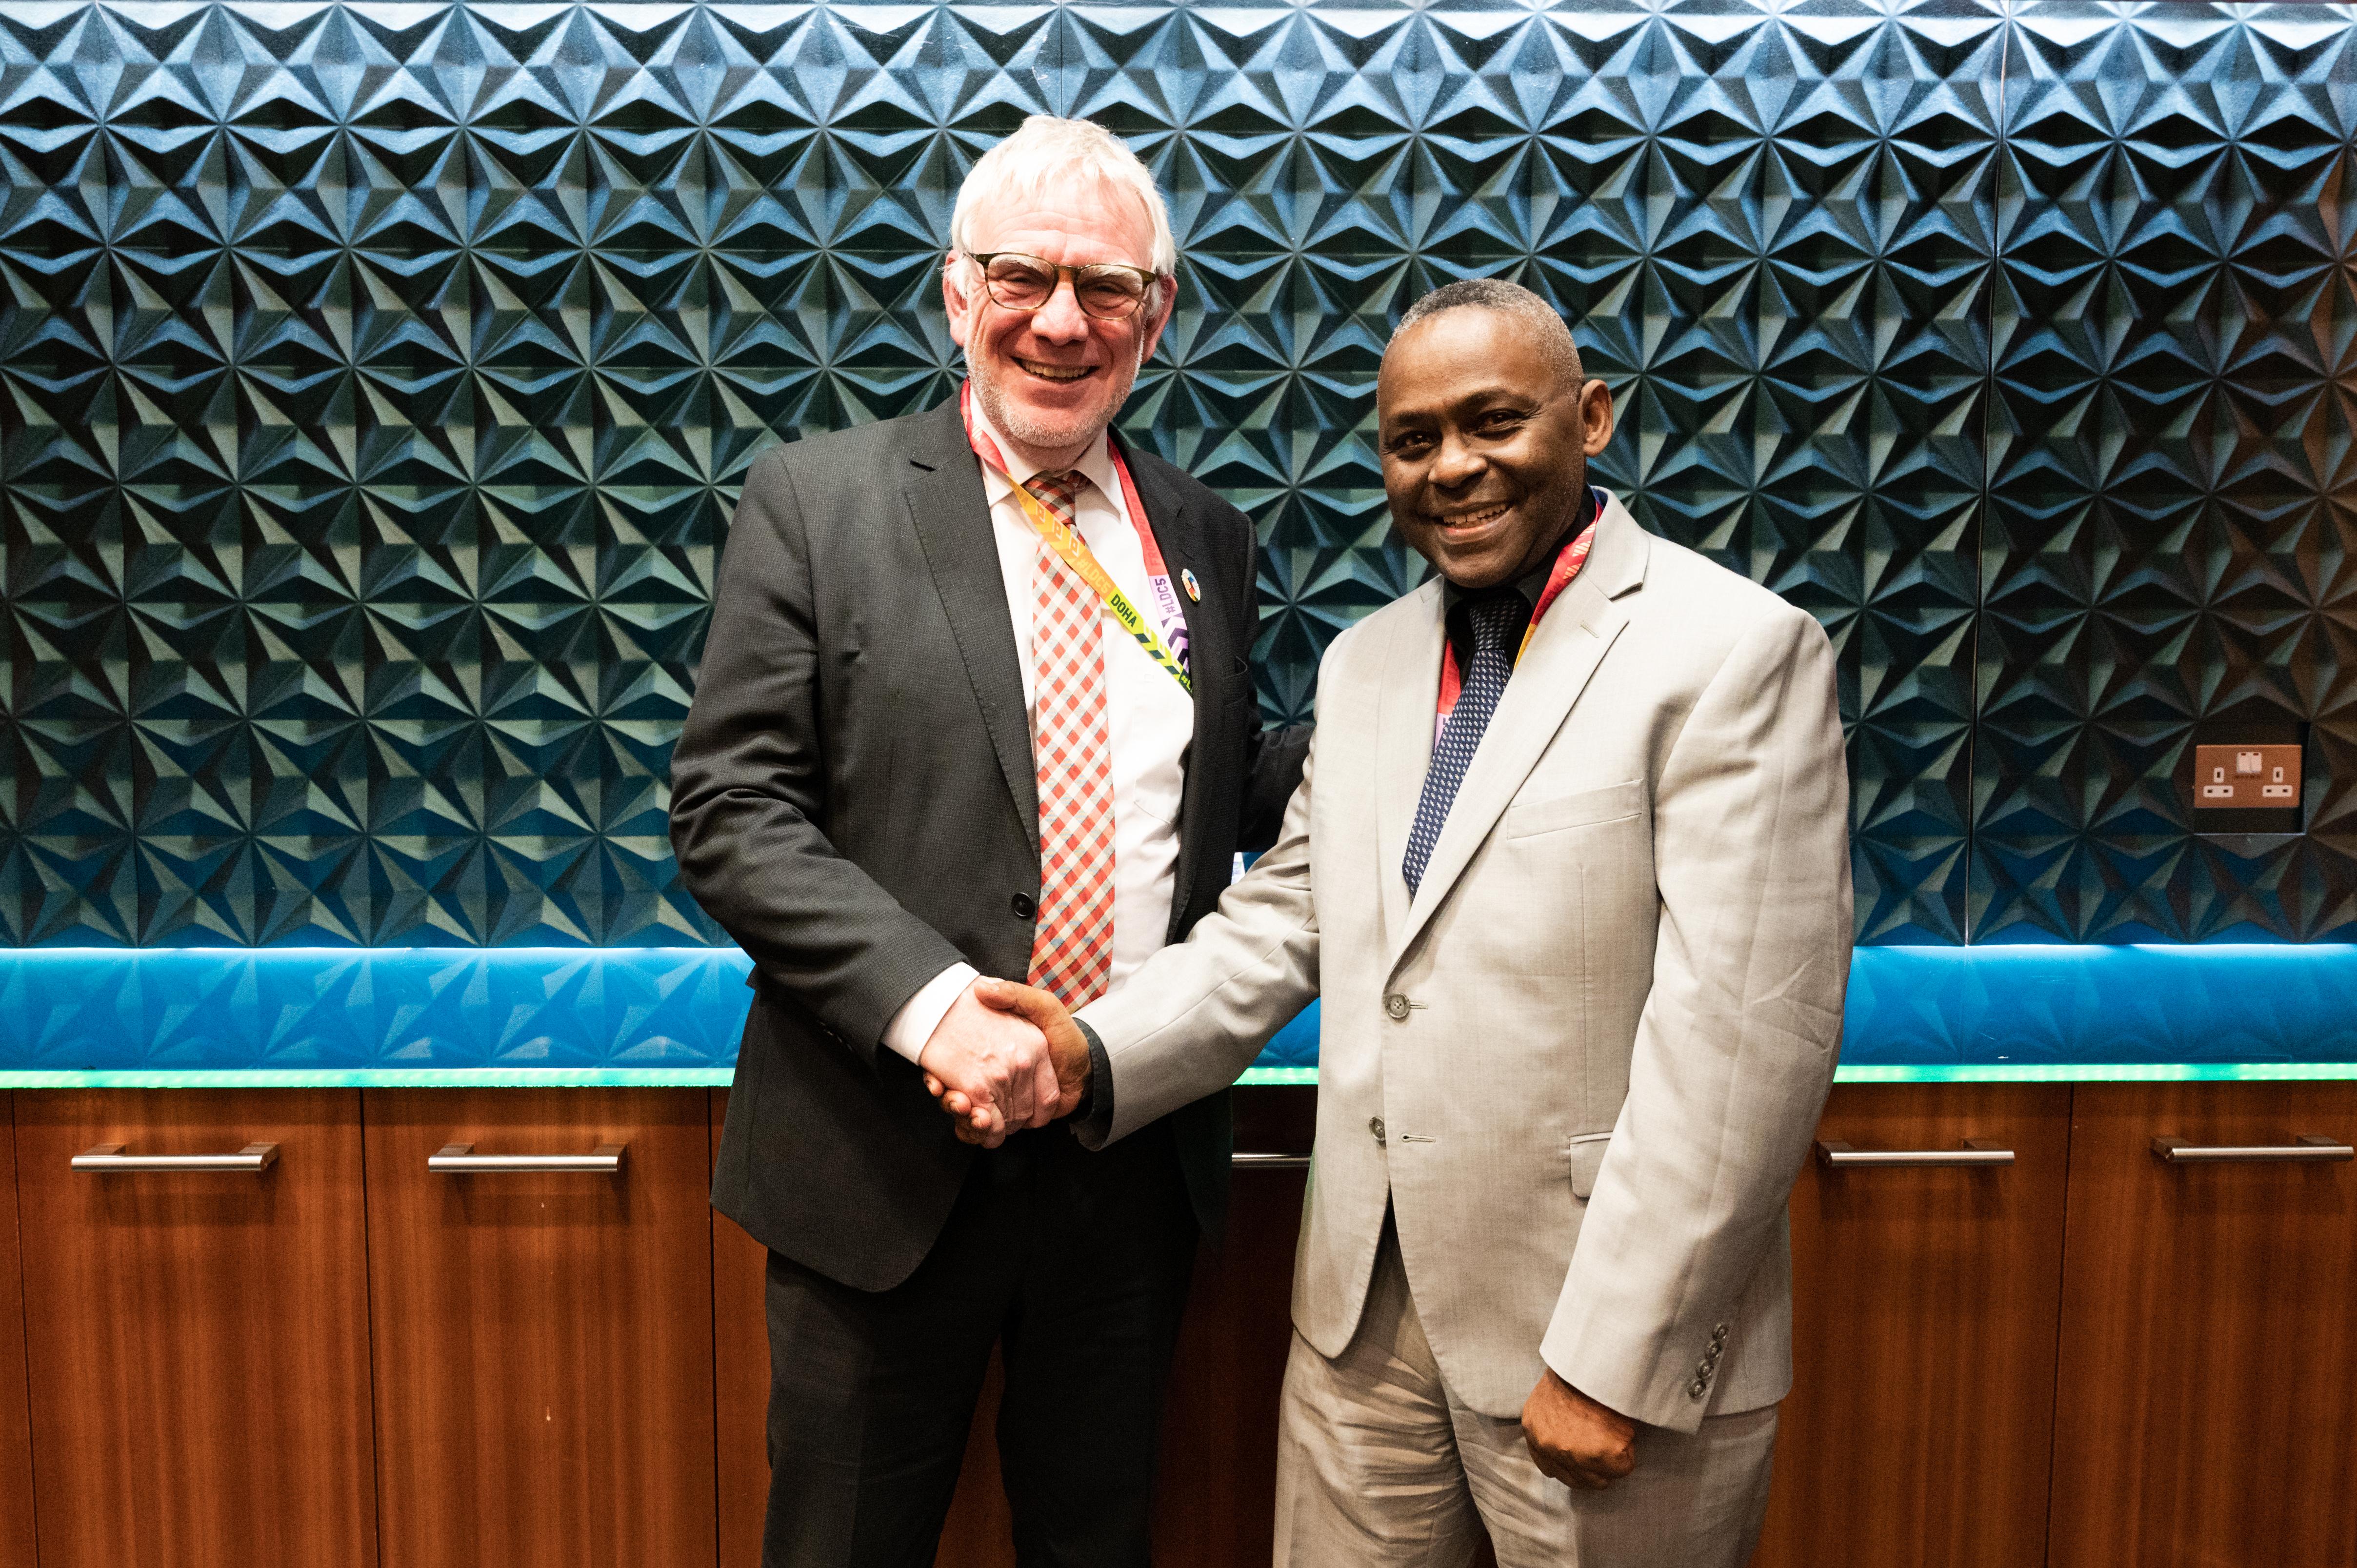 Jochen Flasbarth, State Secretary at the Federal Ministry for Economic Cooperation and Development of Germany (left) and Prof. Murenzi (photo: G. Ortolani/TWAS)